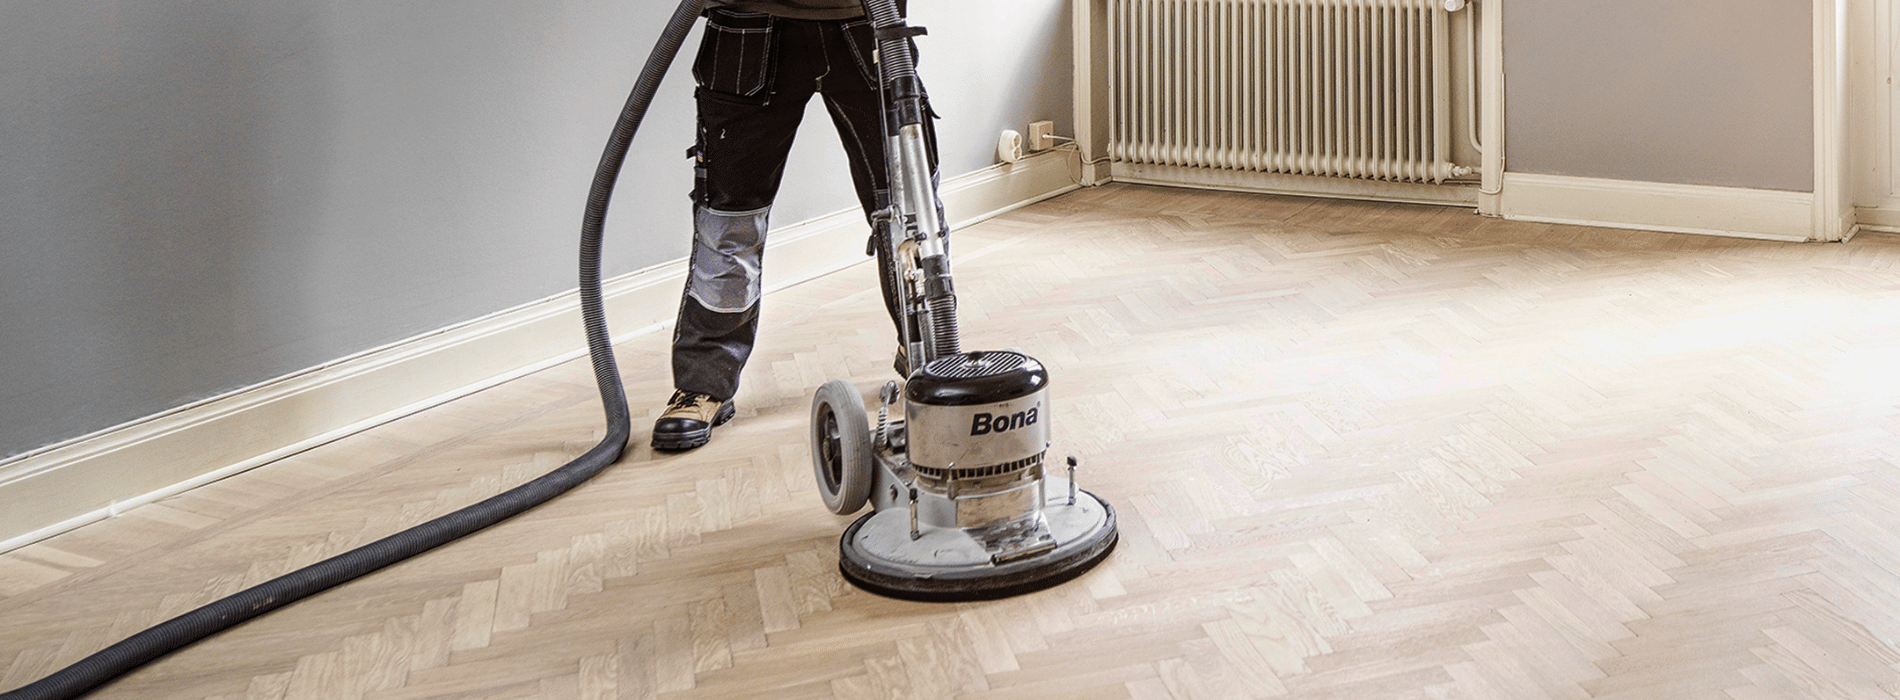 In Kentish Town, NW5, Mr Sander® are using a Bona FlexiSand 1.5 buffer sander with Ø 405 mm dimension, 1.8 kW effect, 240 V voltage, and 50 Hz/60 Hz frequency. They connect it to a dust extraction system with a HEPA filter for clean and efficient results while sanding a herringbone floor.